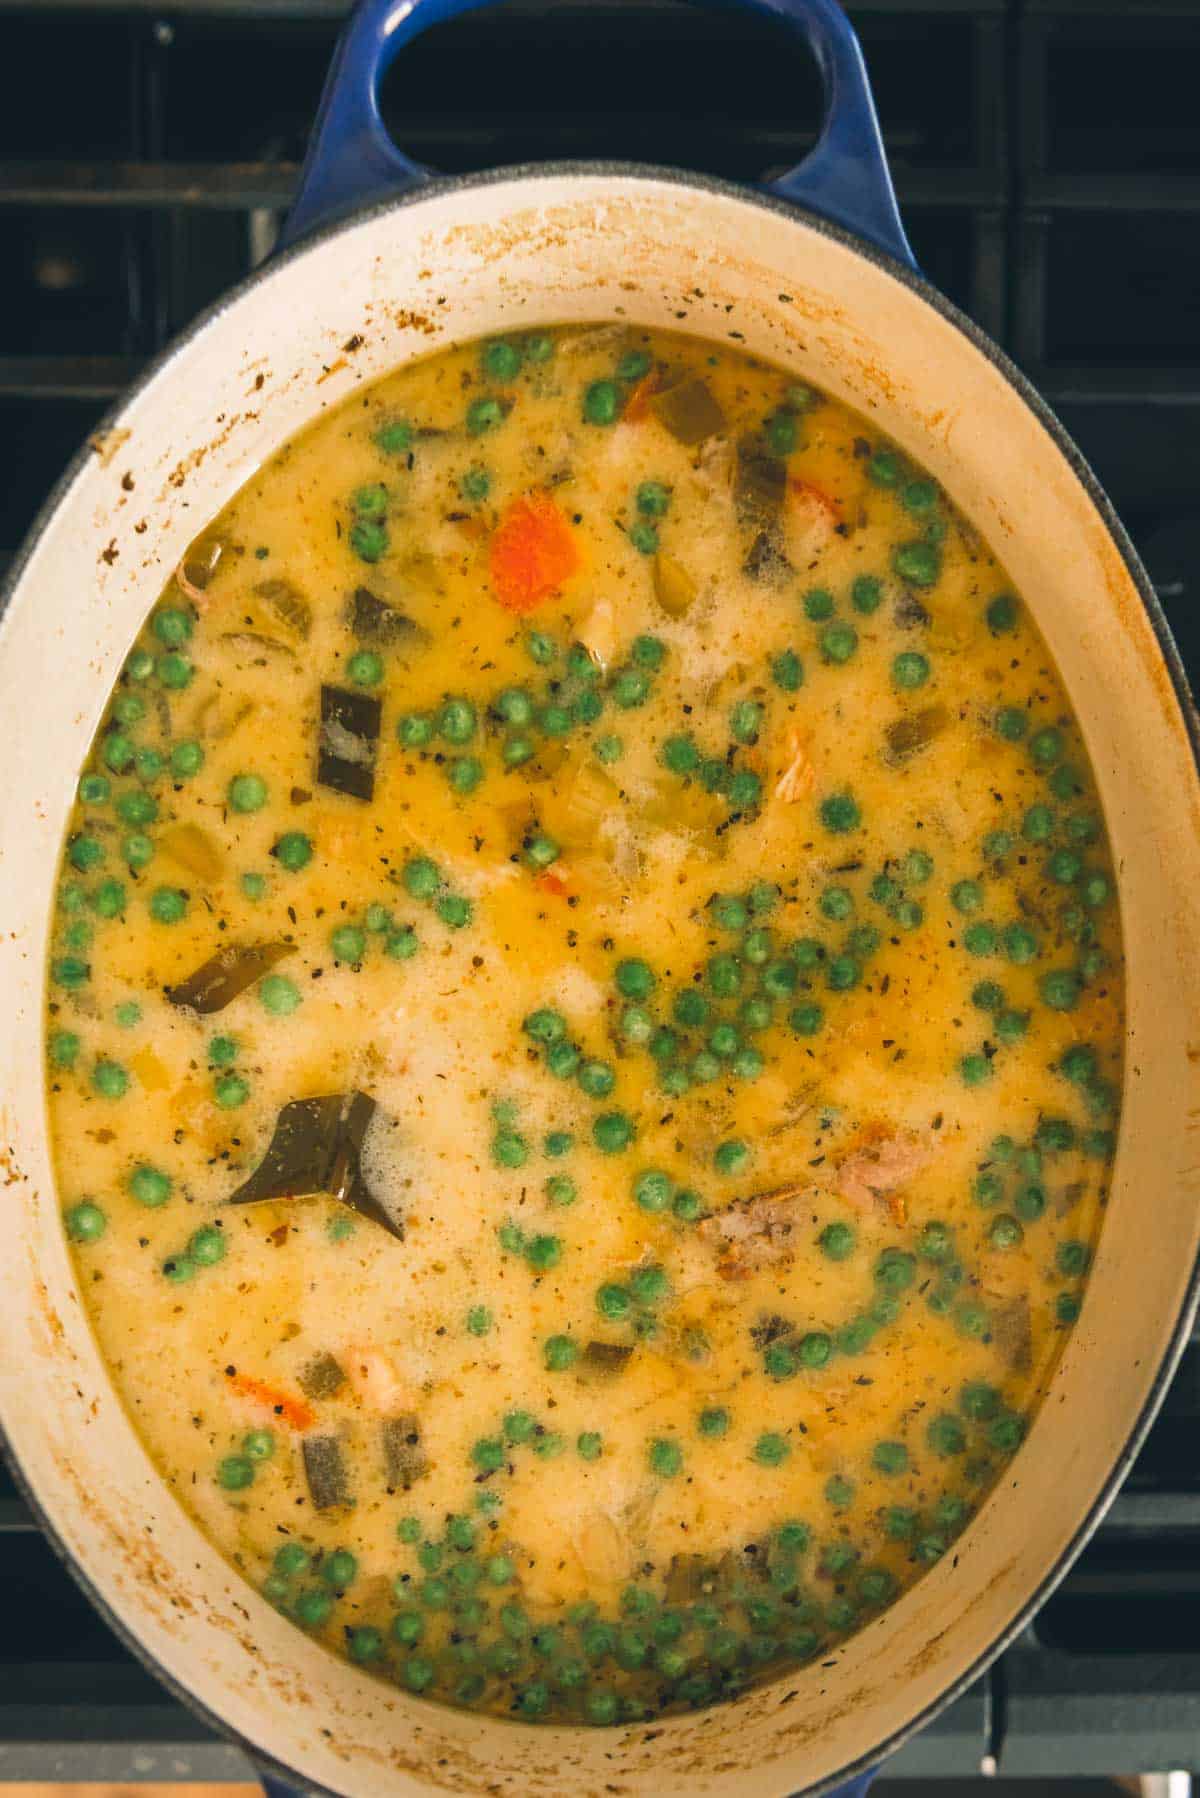 A pot of soup with peas and carrots on top of a stove.